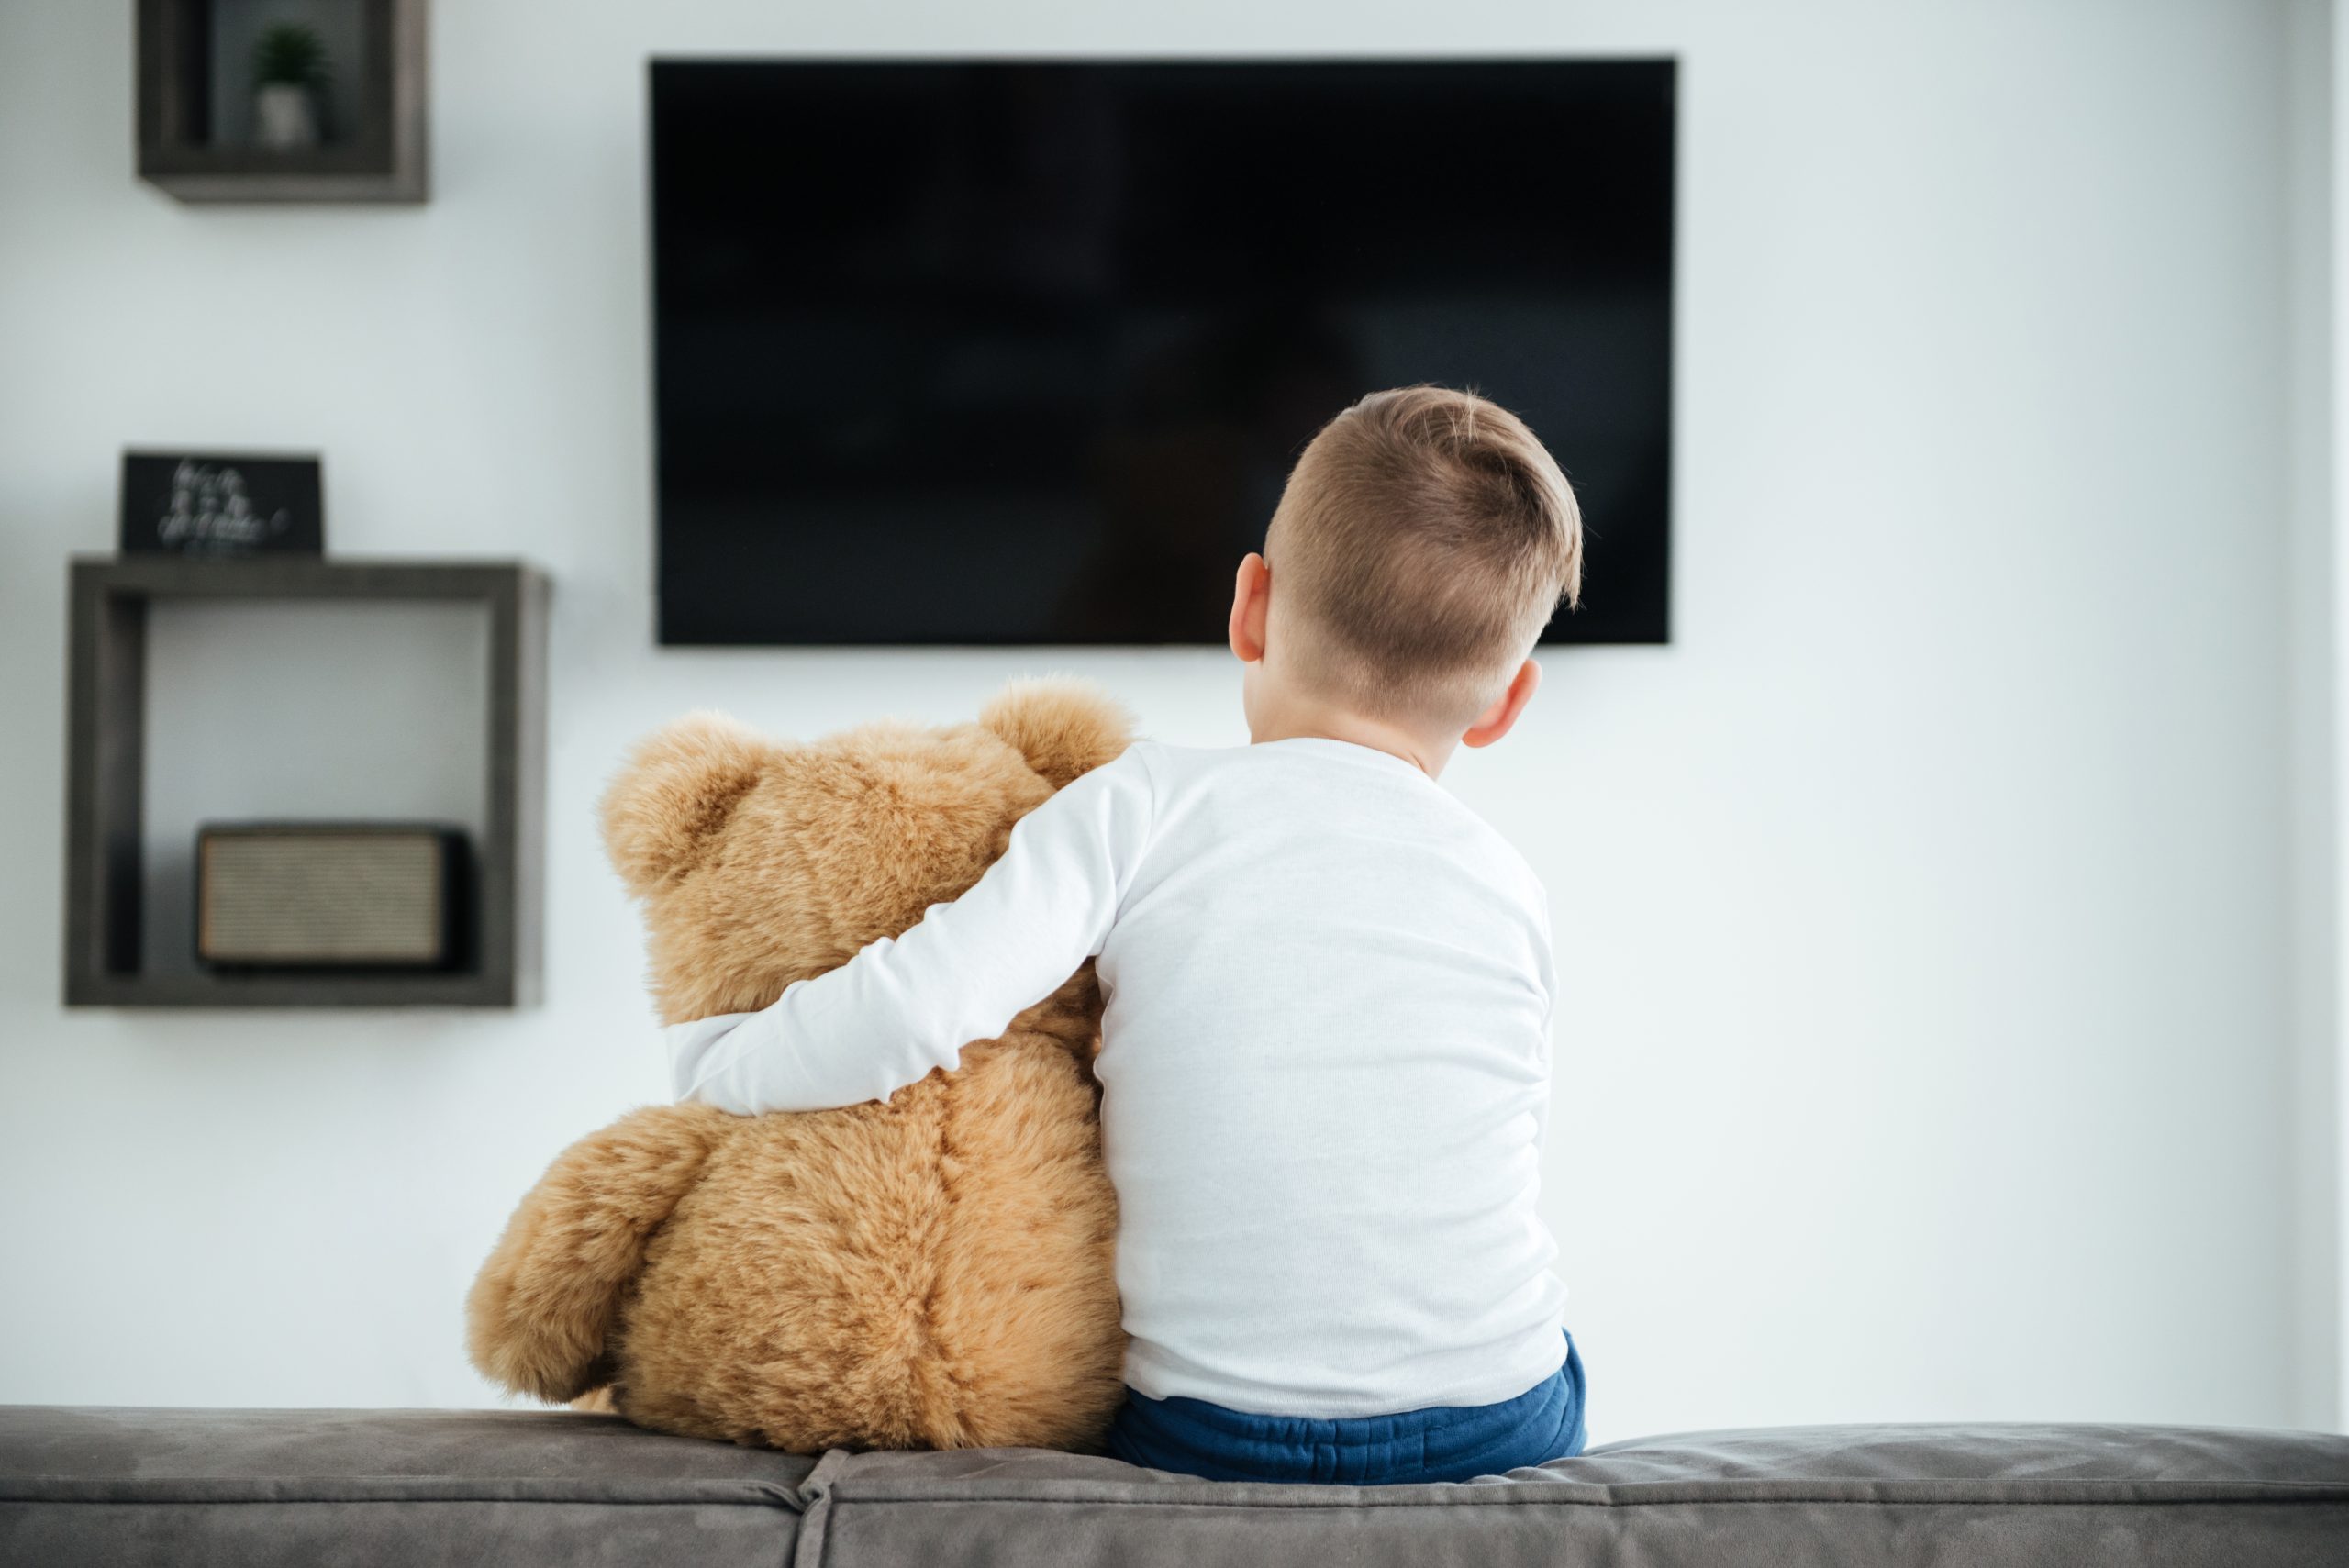 Back view image of a little boy sitting on sofa with teddy bear waiting for parents at home.